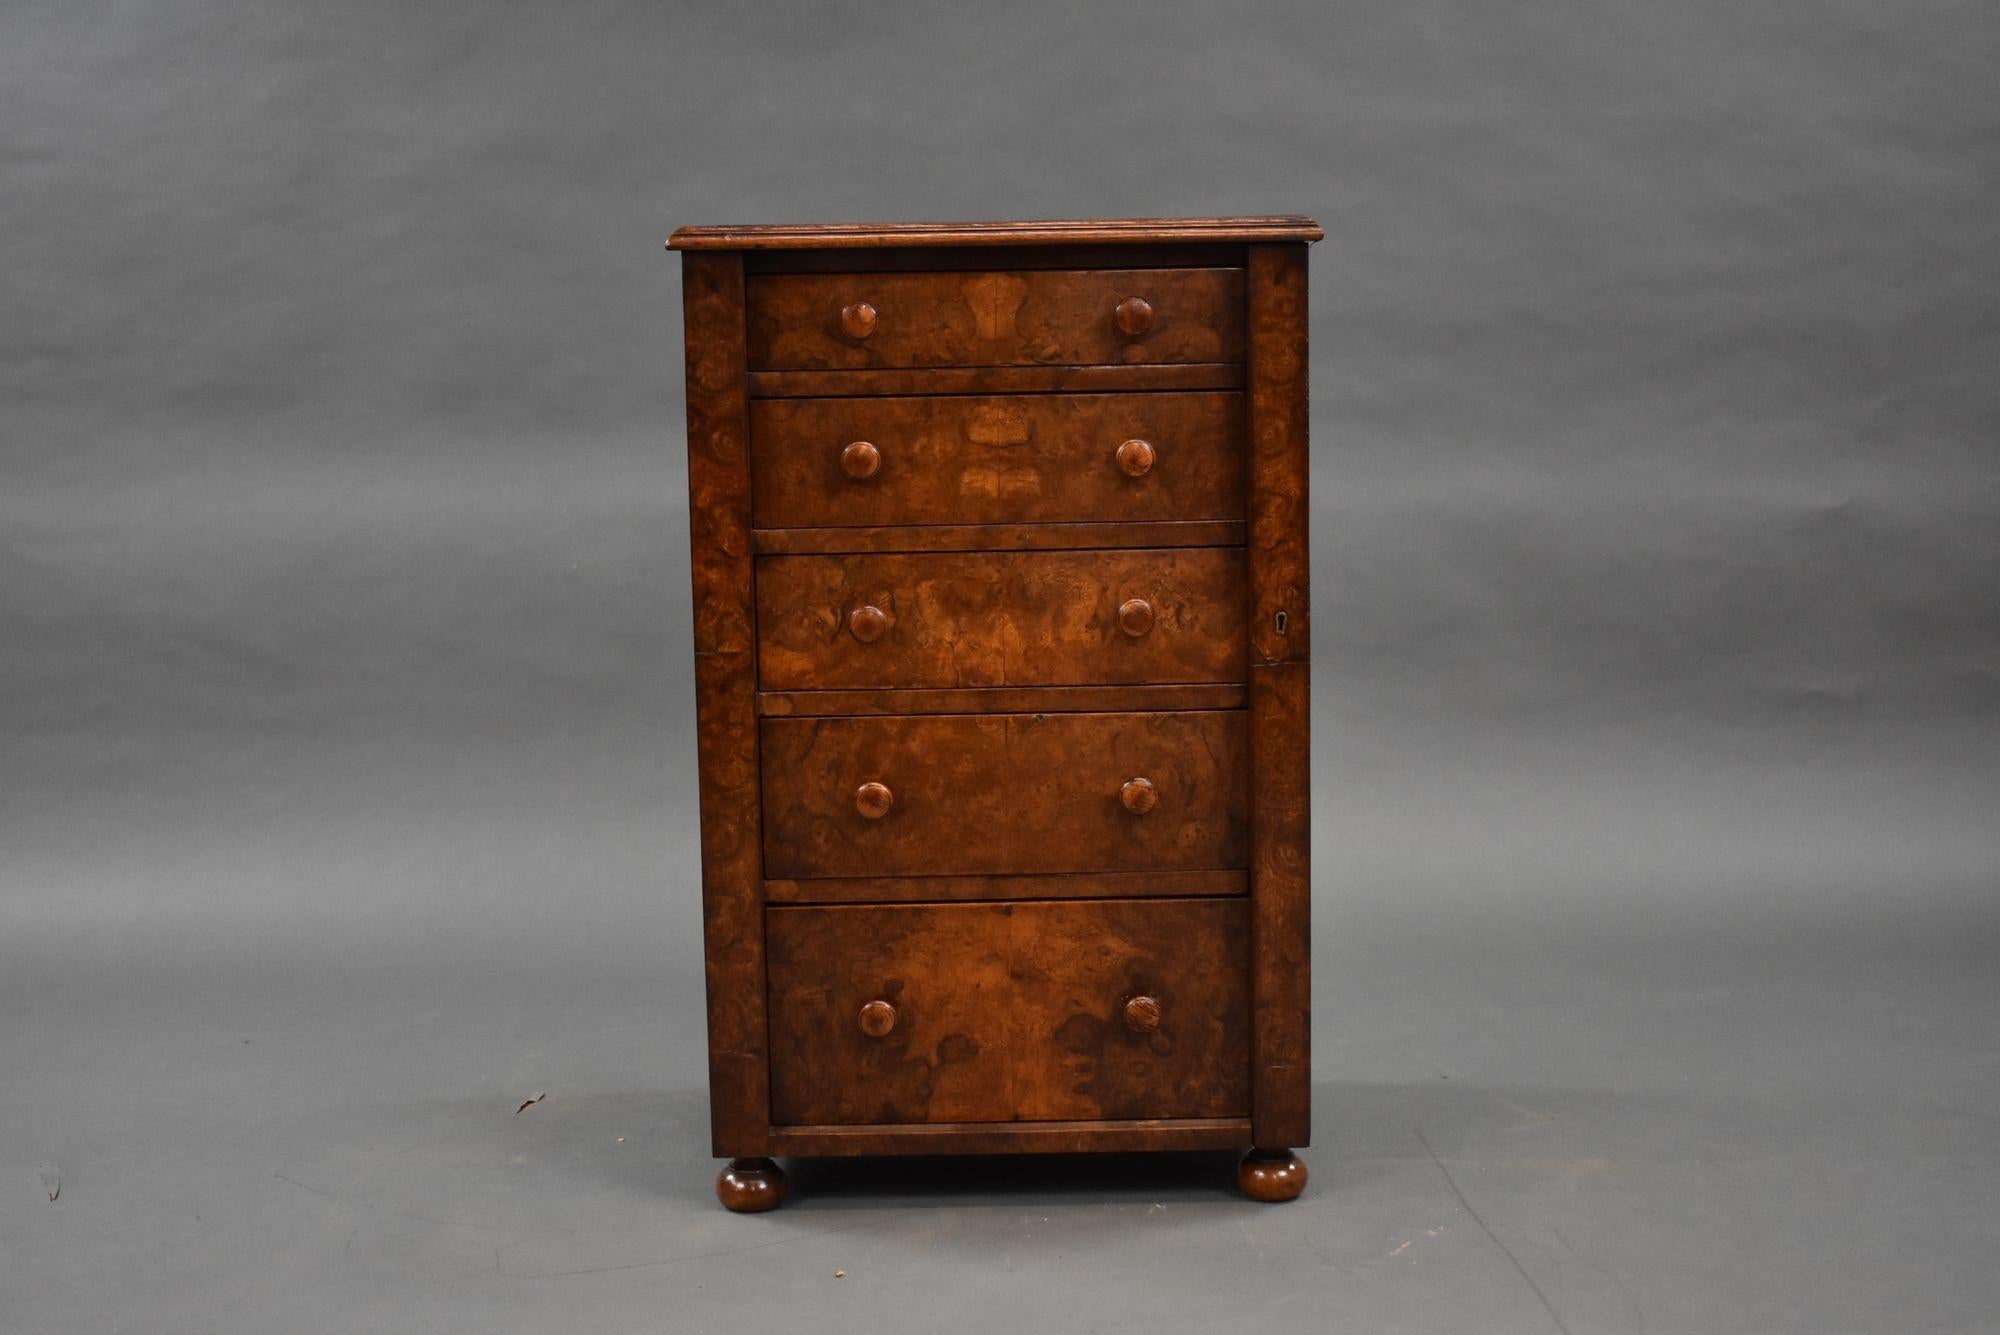 For sale is an antique burr walnut wellington chest, having a quarter veneered top over an arrangement of five graduated drawers, locked by a single side locker. The chest stands on bun feet and is in very good condition for its age.